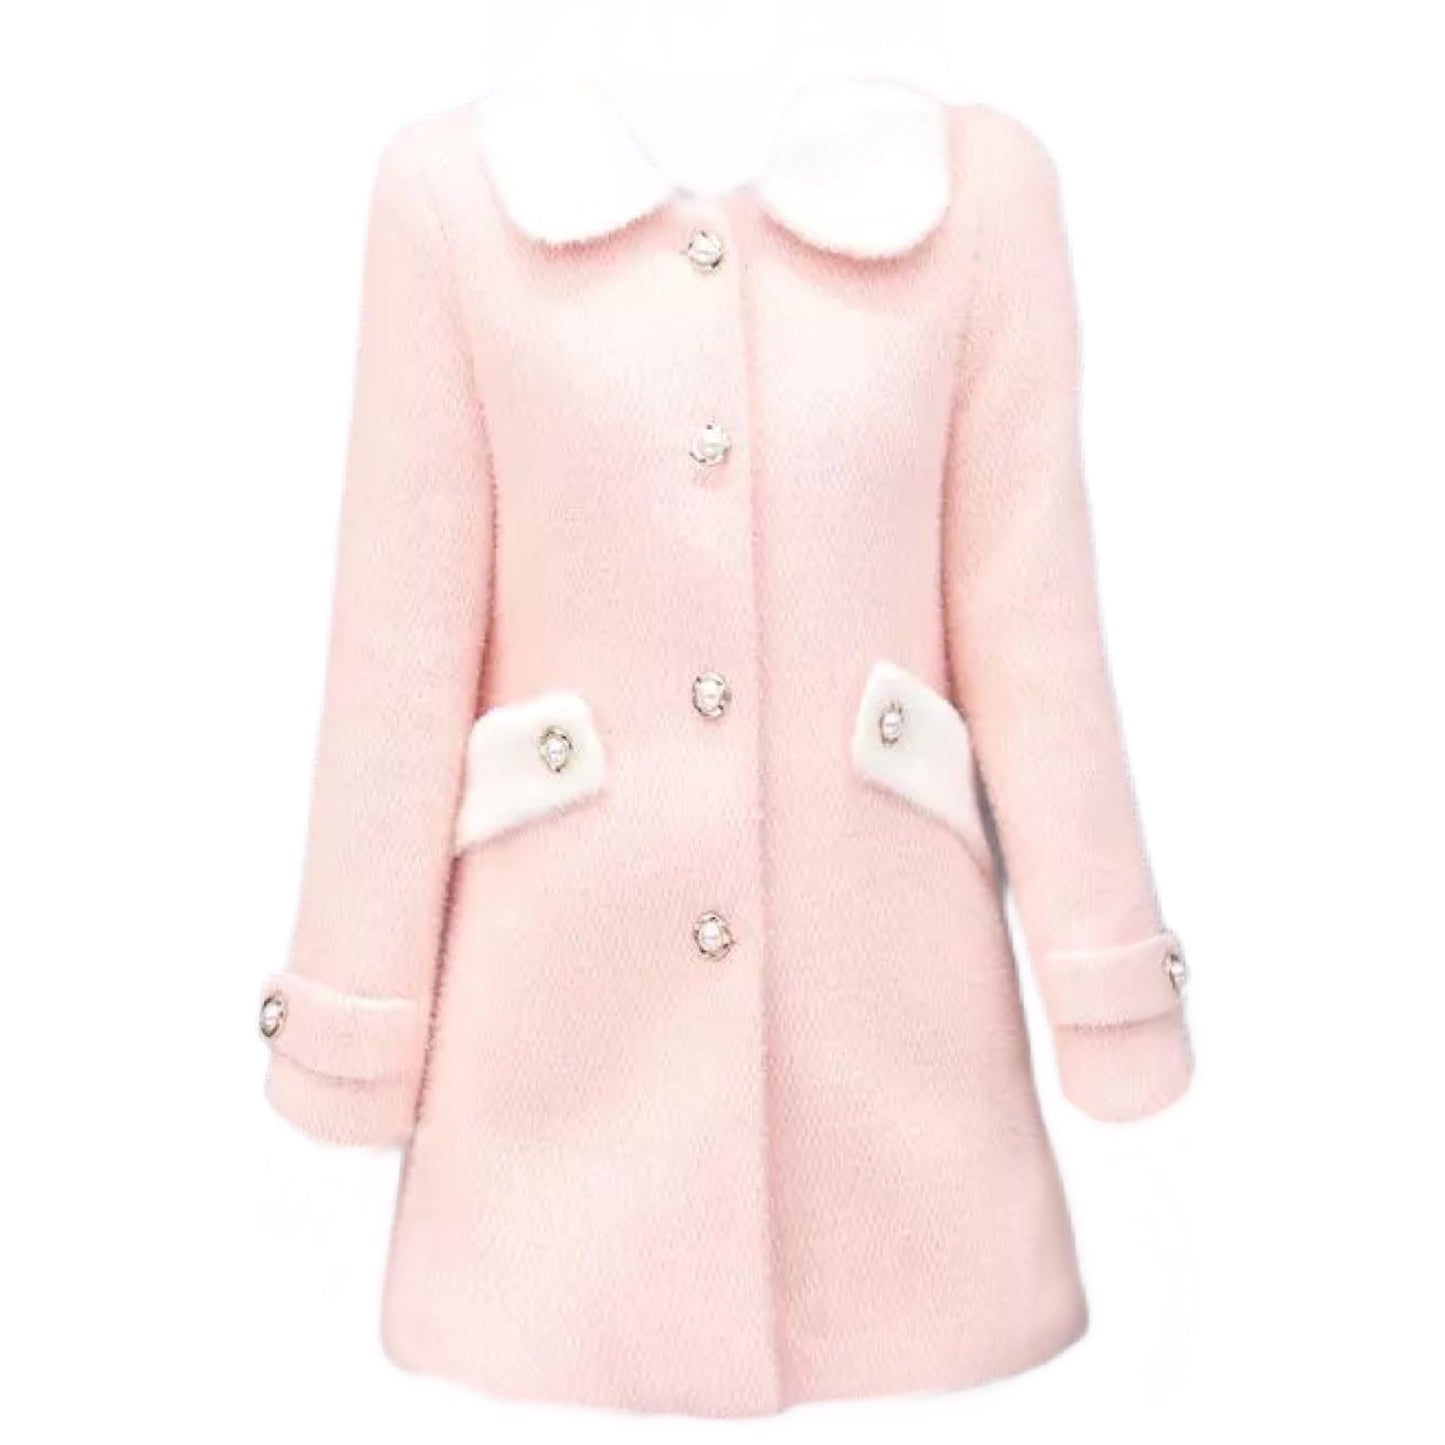 London Dreaming Trench Coat - Soft Pink